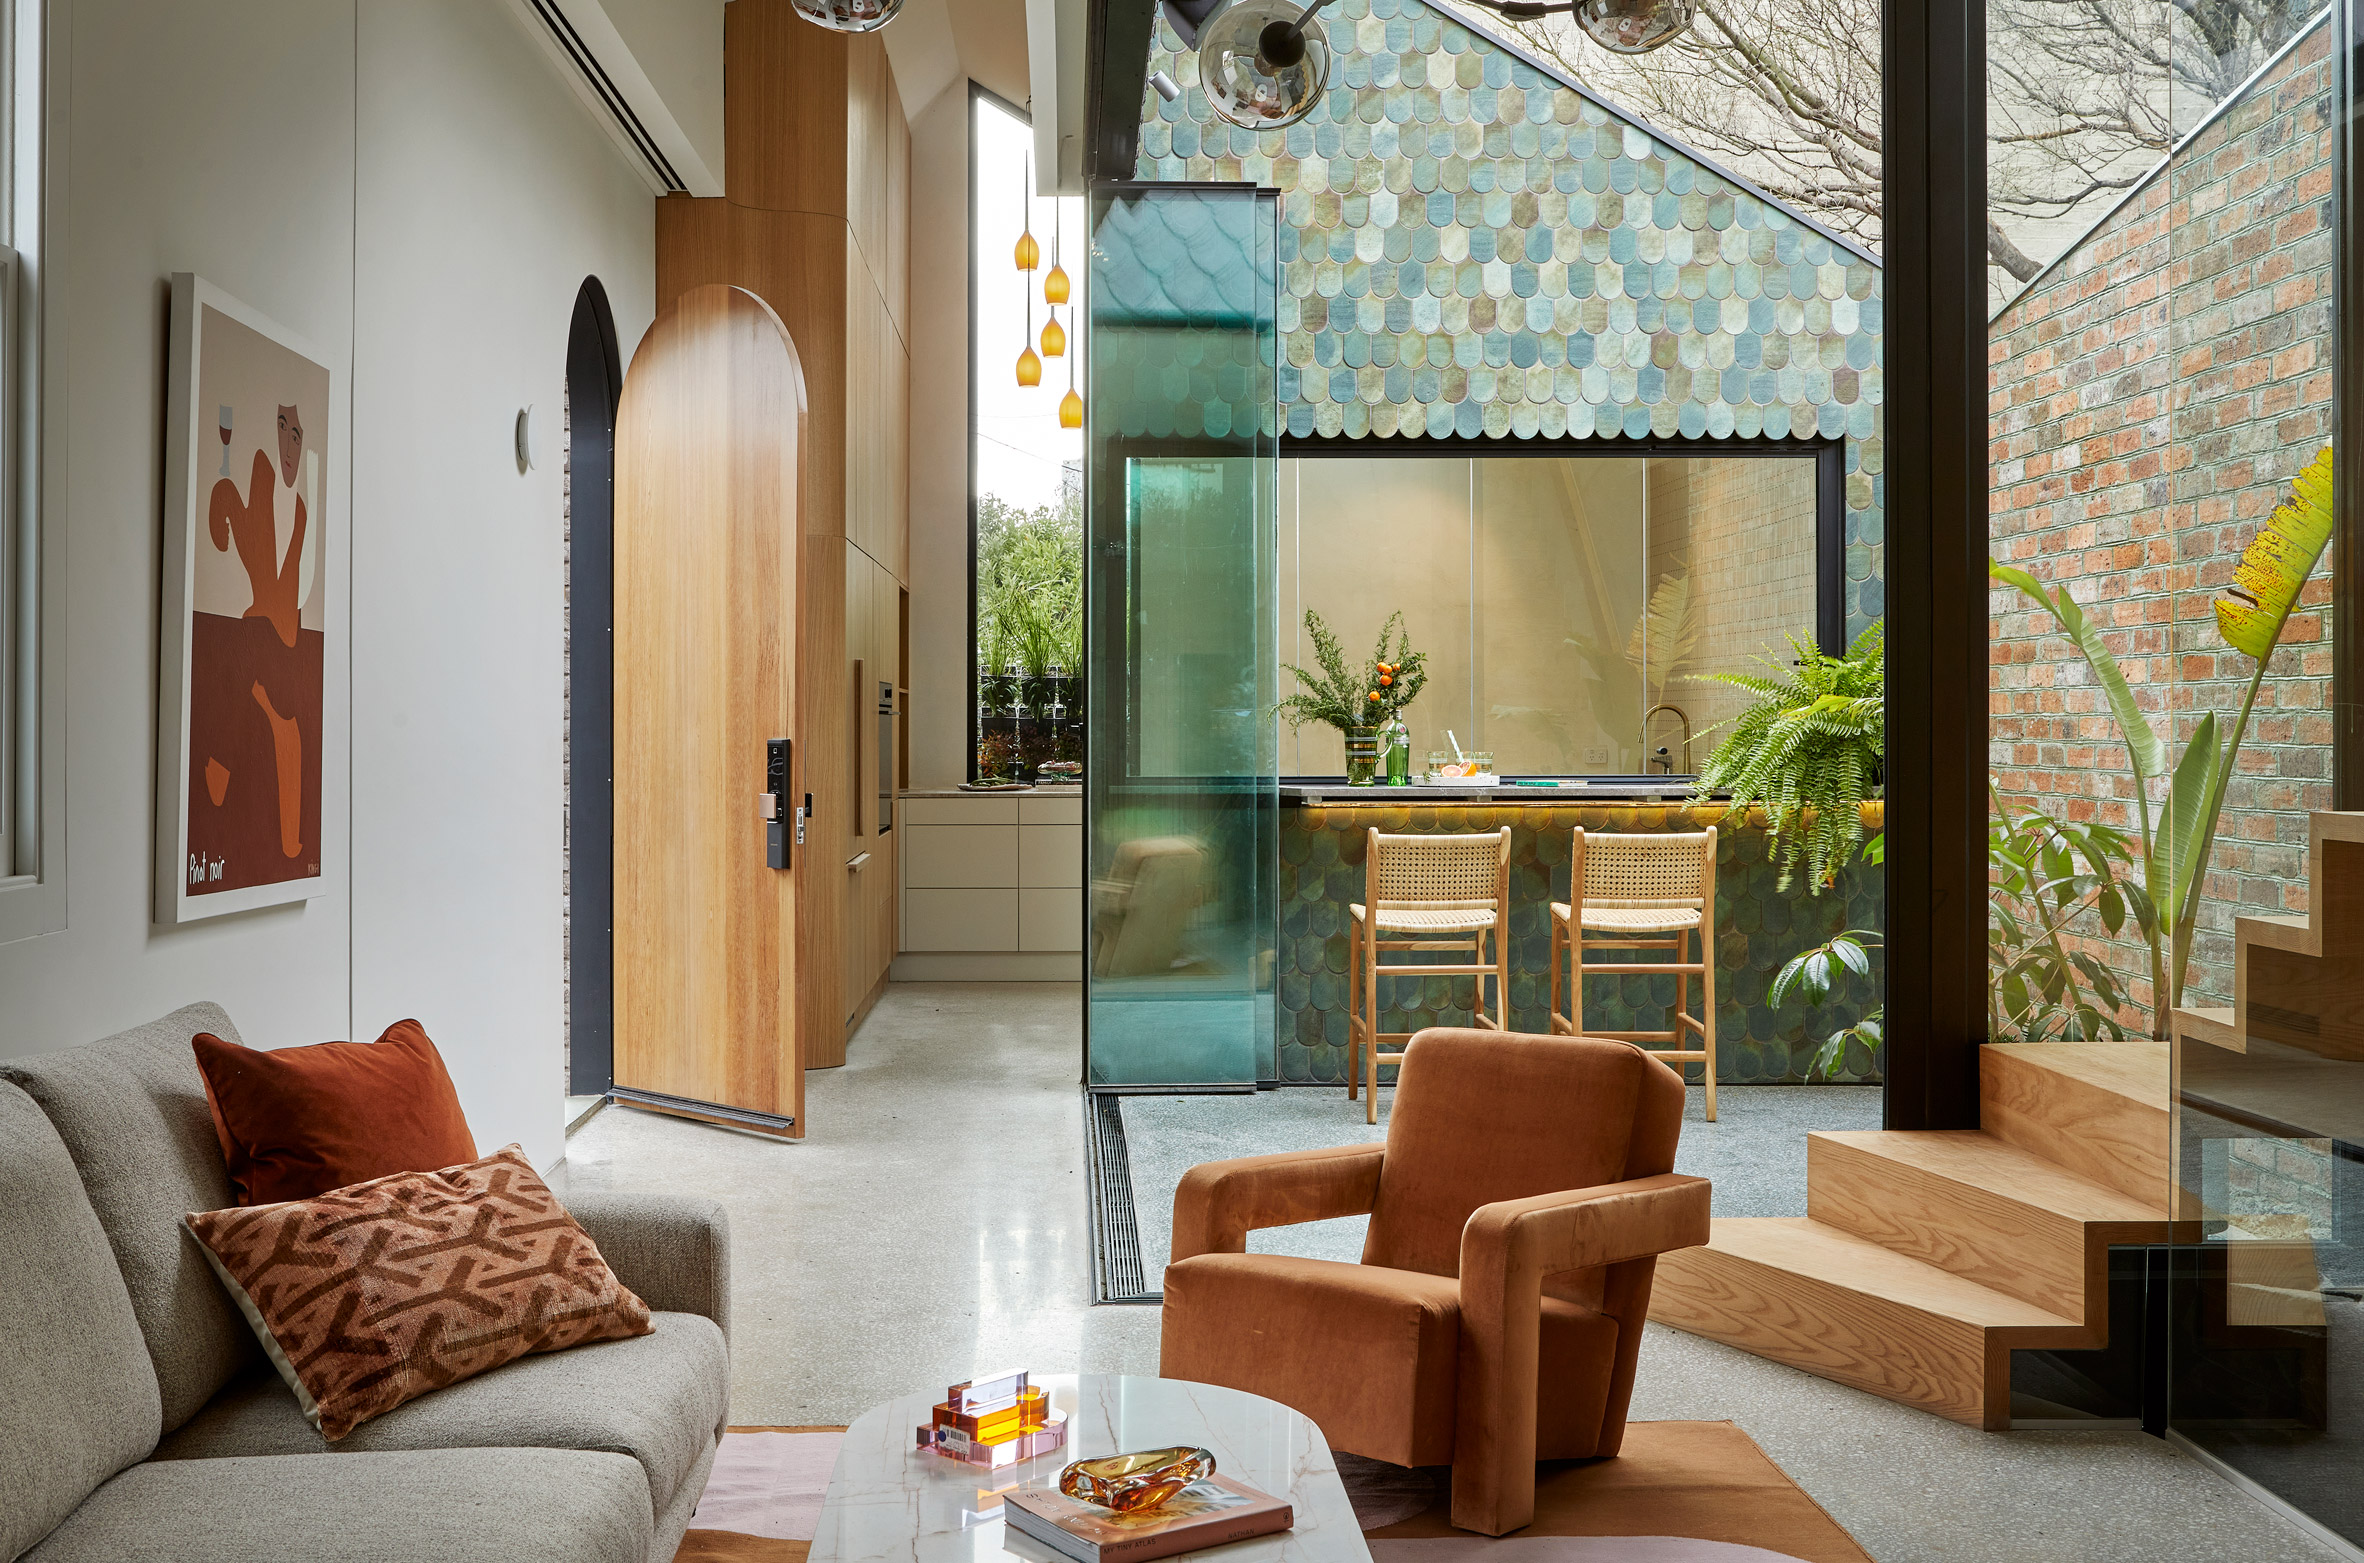 Living area with orange chairs and glass walls wrapped round courtyard with blue and green tiles